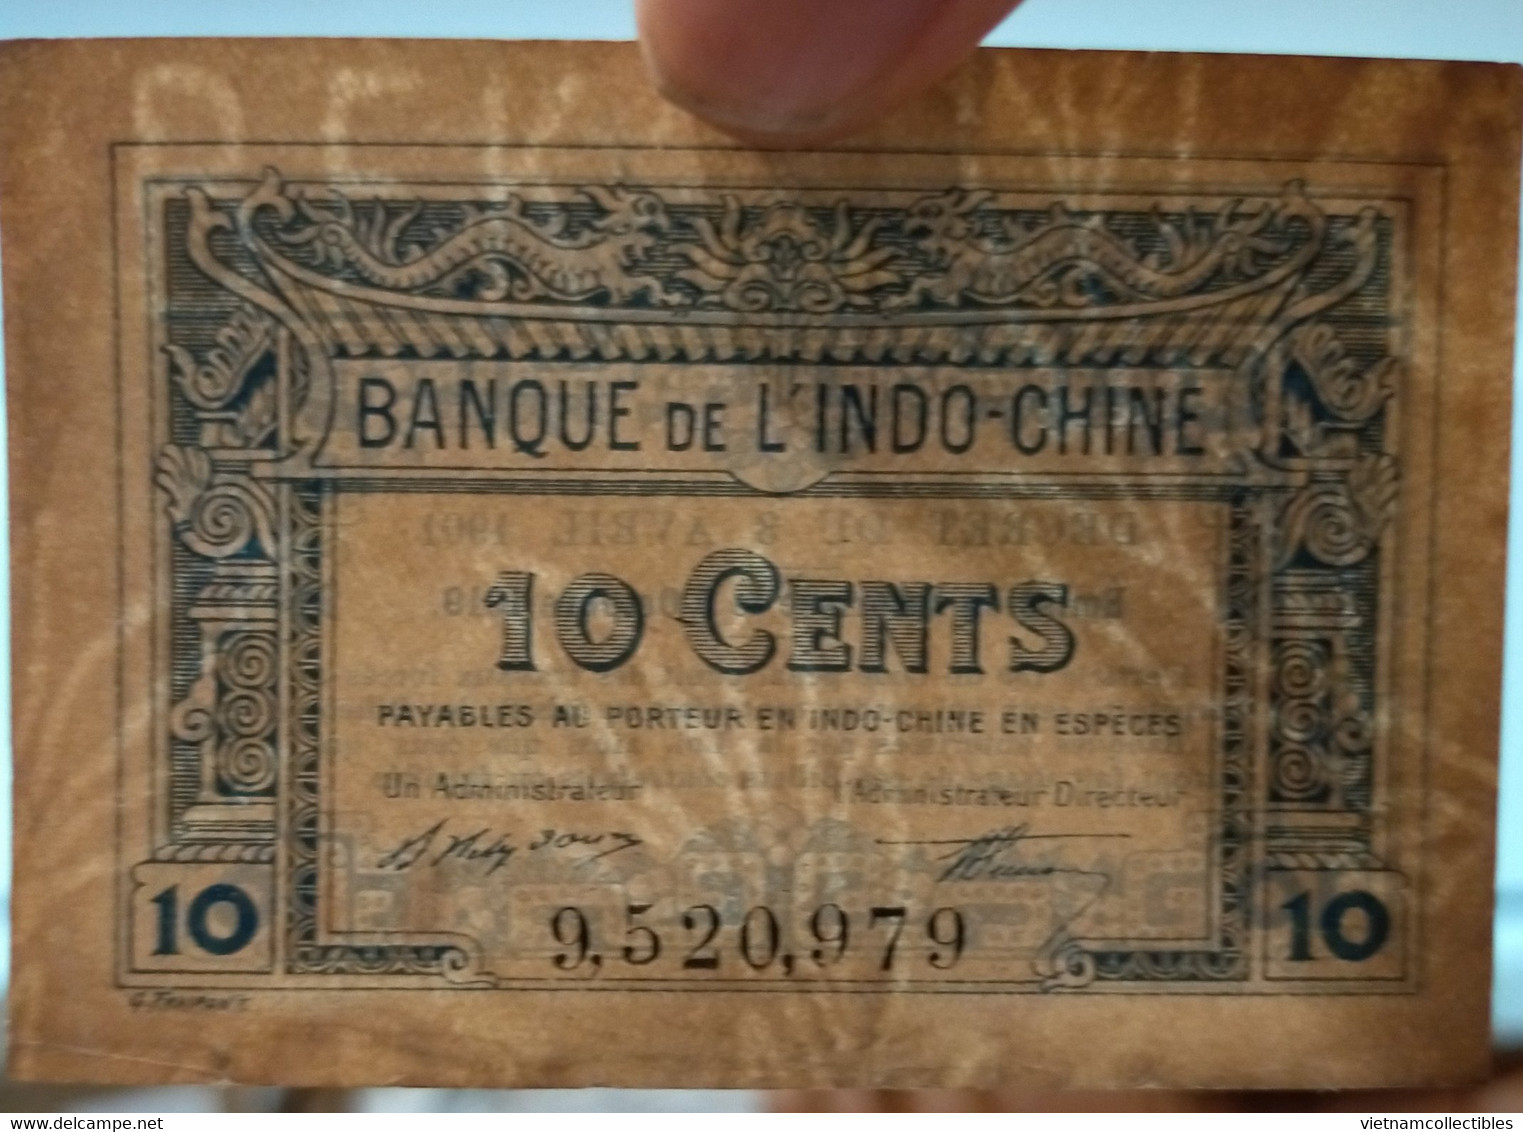 French Indochina Indo China Indochine Laos Vietnam Cambodia 10 Cents EF Banknote Note 1901 - 1919 - P# 43 / 03 Photos - Indochina